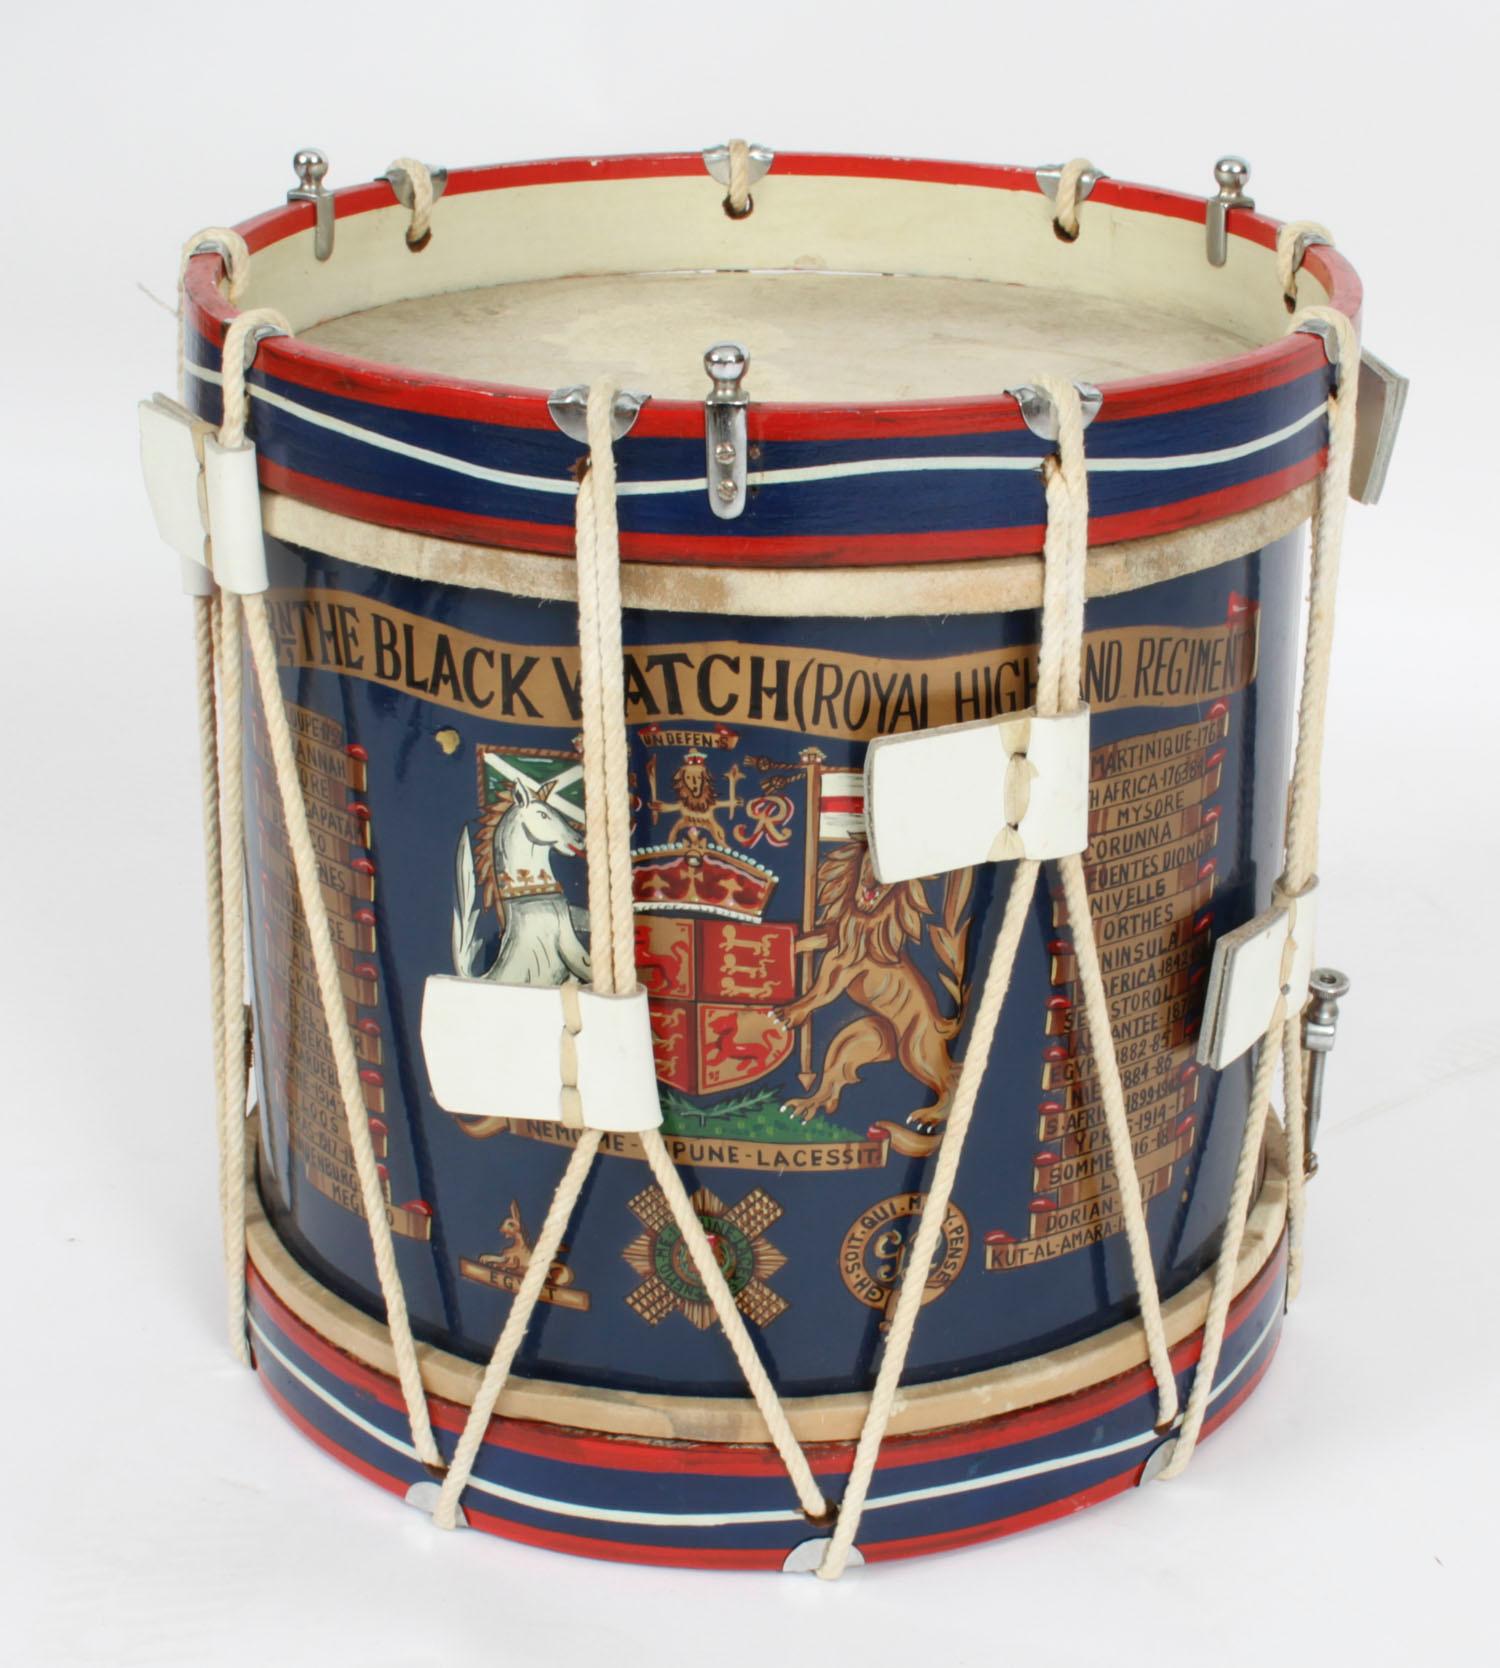 This is an elegant antique wood, brass and leather military drum, dating from the early 20th century.

It bears superb painted decoration of The Black Watch (The Royal Highlanders).
 
The unique quality and elaborate design of this drum are